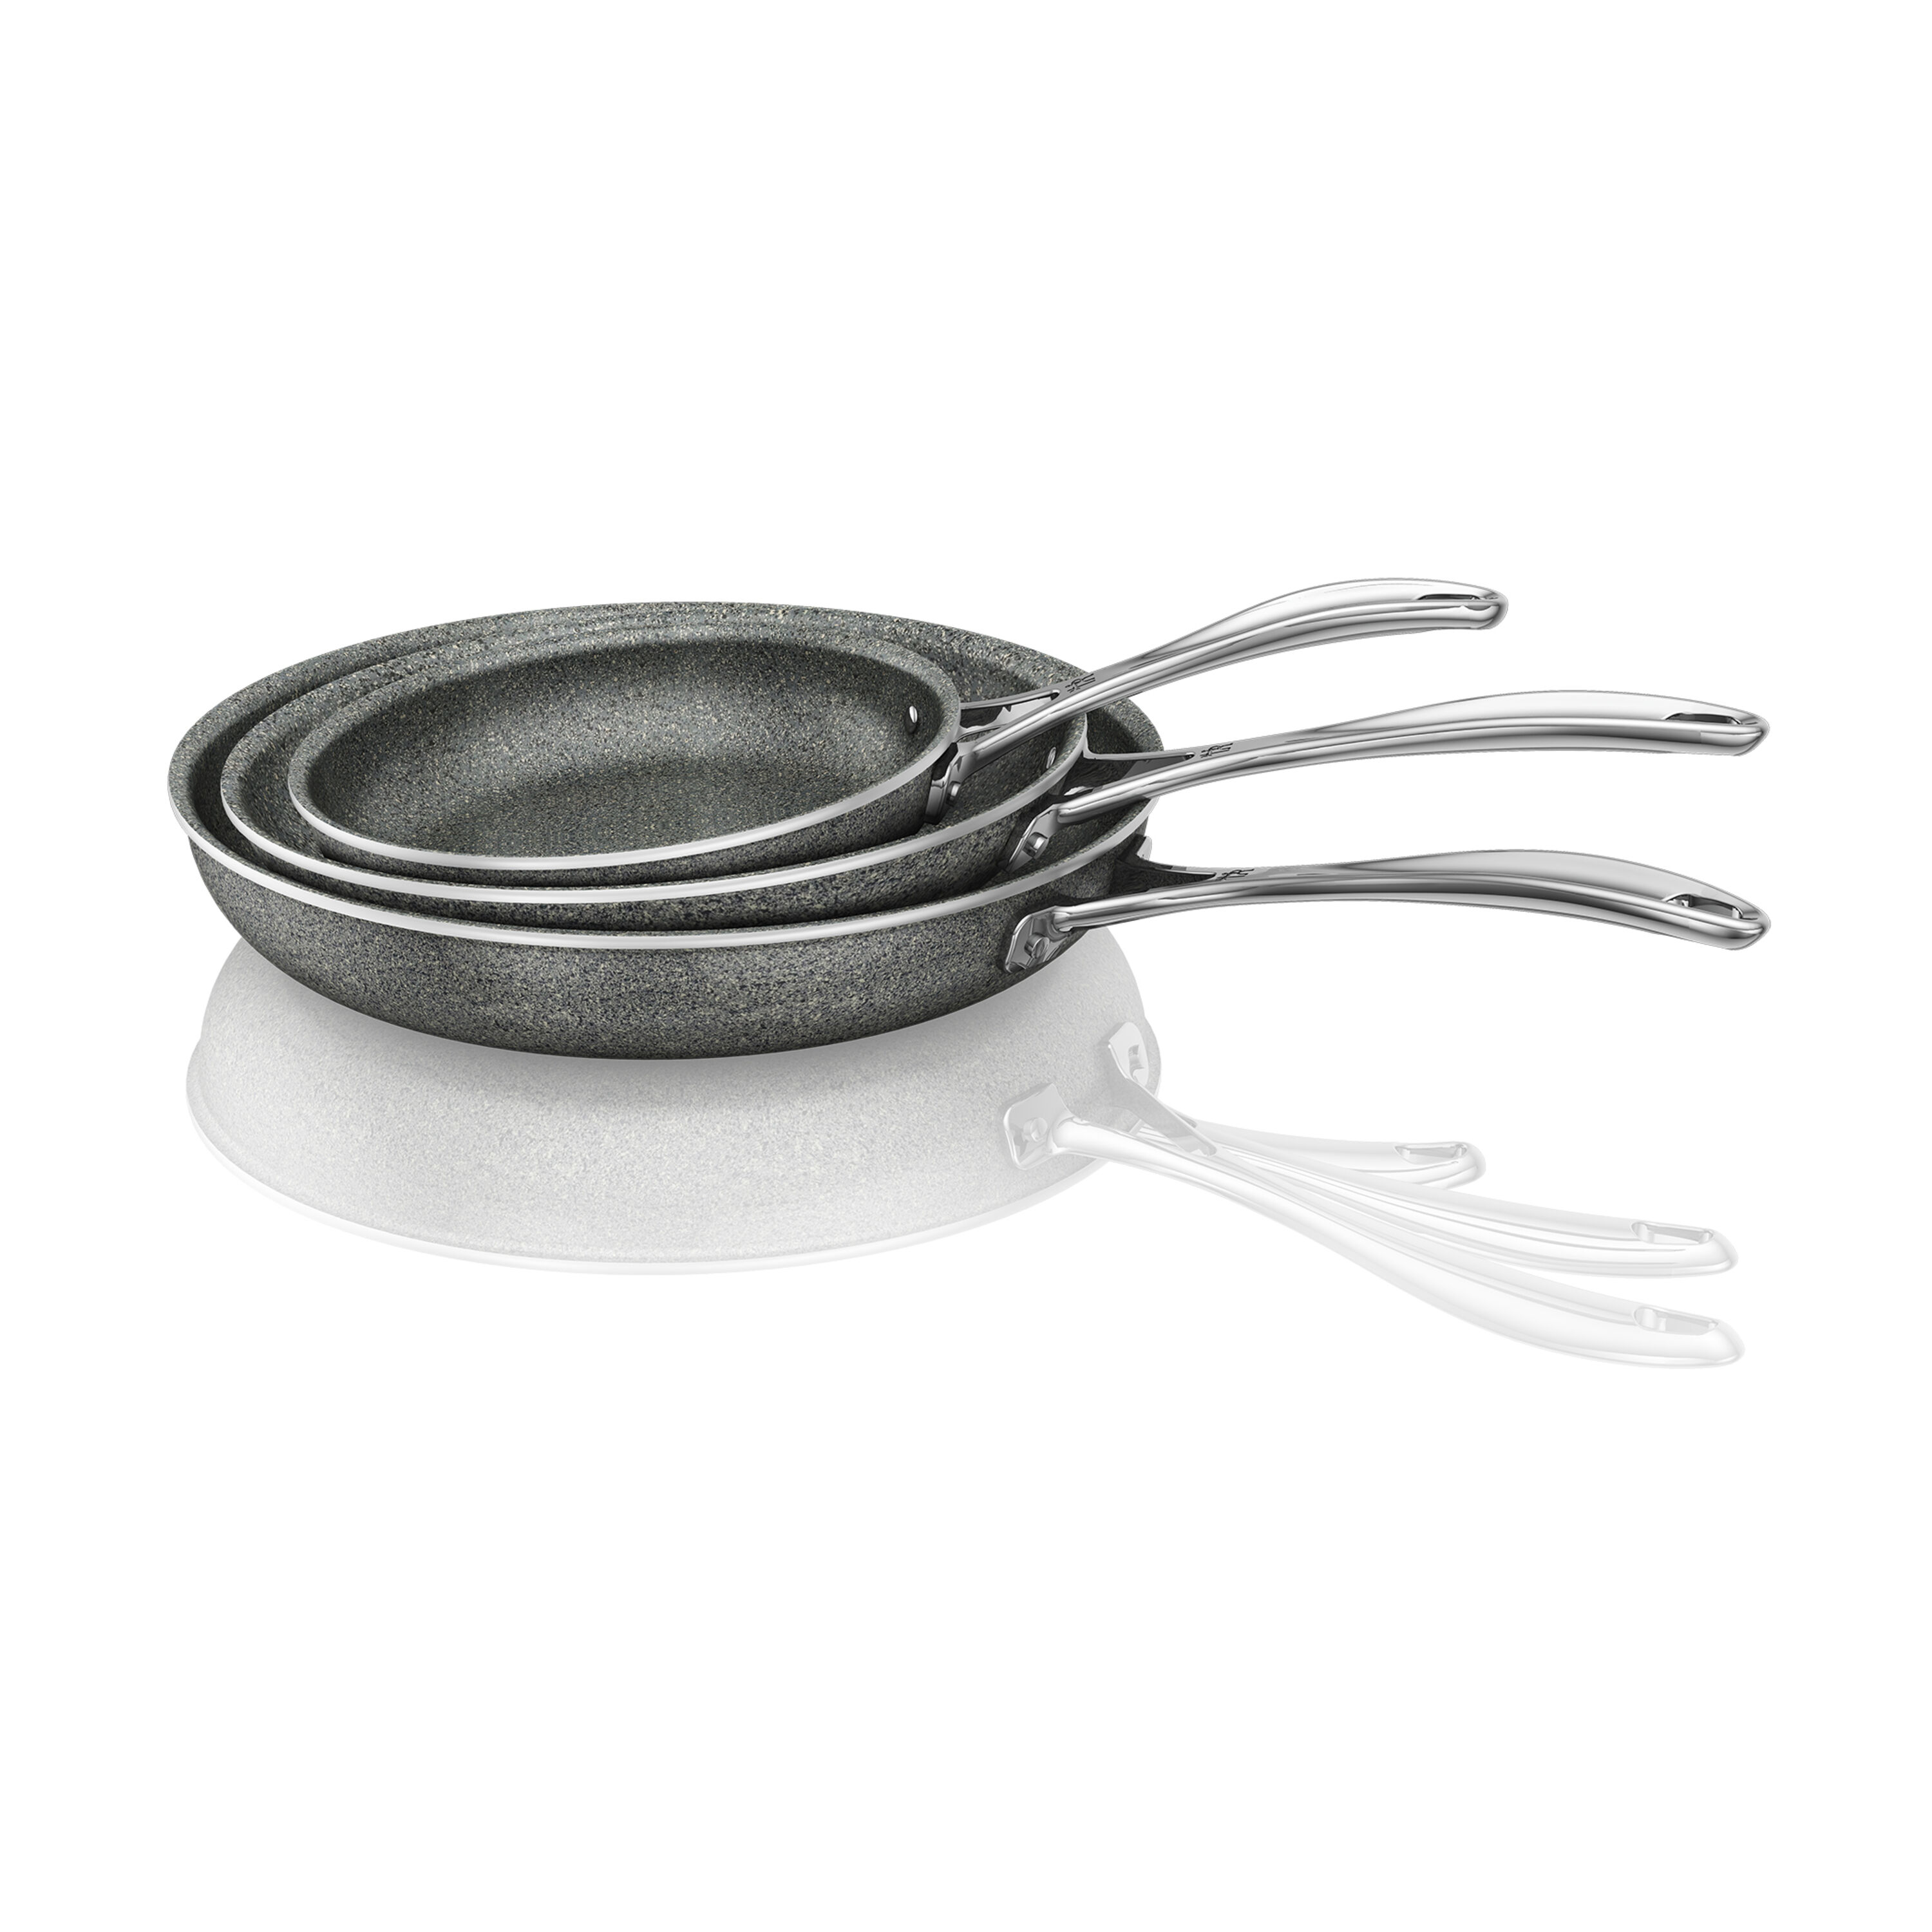  Made In Cookware - Non Stick 3 Piece Frying Pan Set